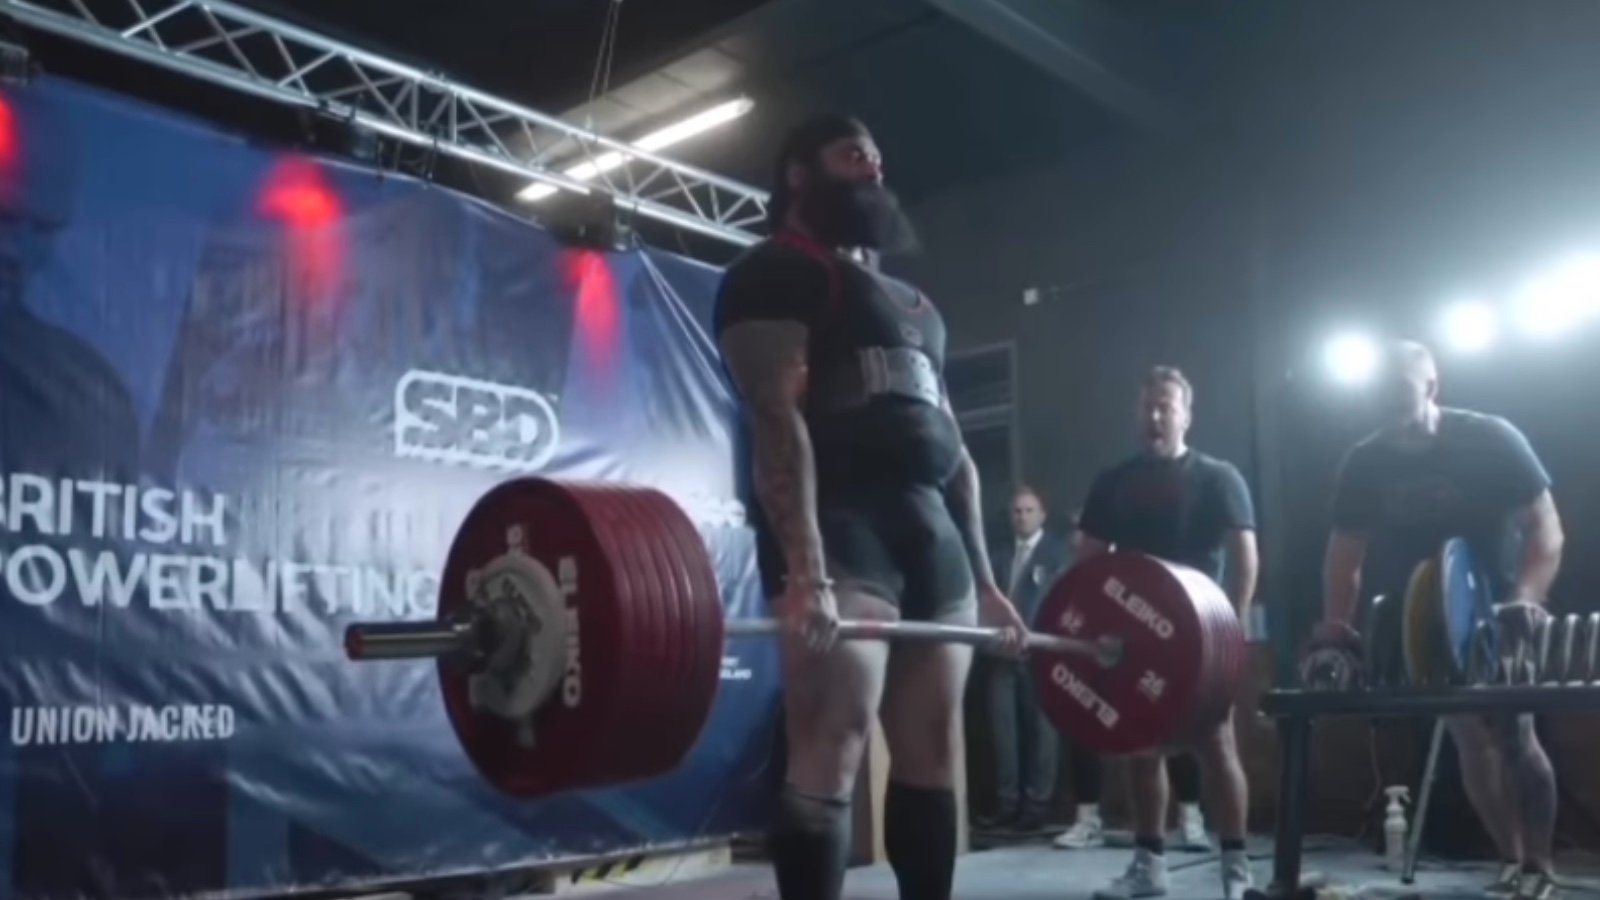 powerlifter-inderraj-singh-dhillon-(120kg)-deadlifts-3855-kilograms-(849.8-pounds)-for-british-powerlifting-record-–-breaking-muscle